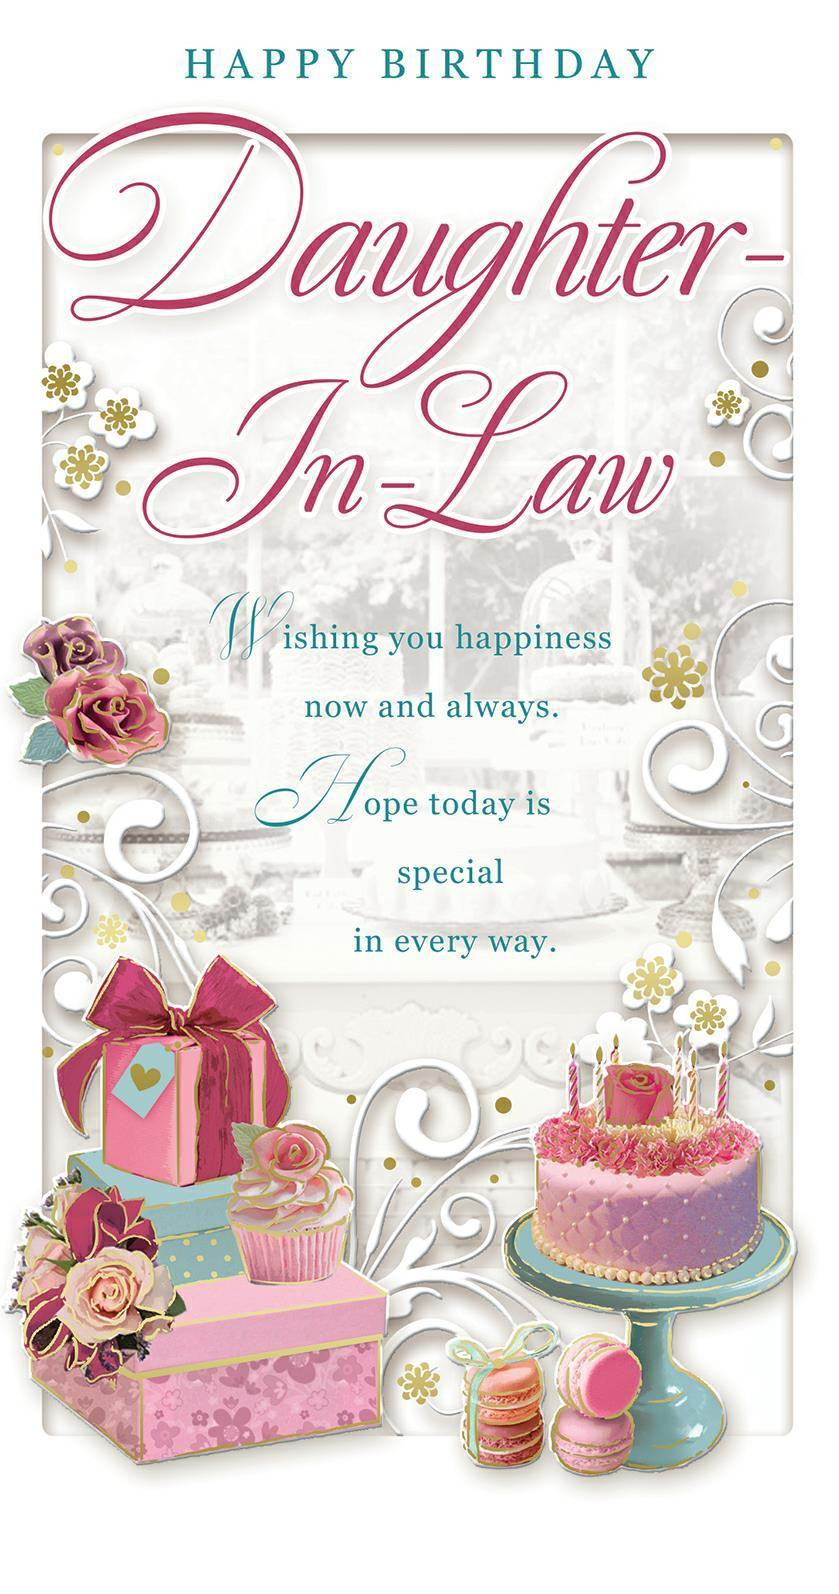 Happy Birthday Cards For Daughter
 HAPPY BIRTHDAY DAUGHTER IN LAW CARD CUPCAKE ROSES GIFTS